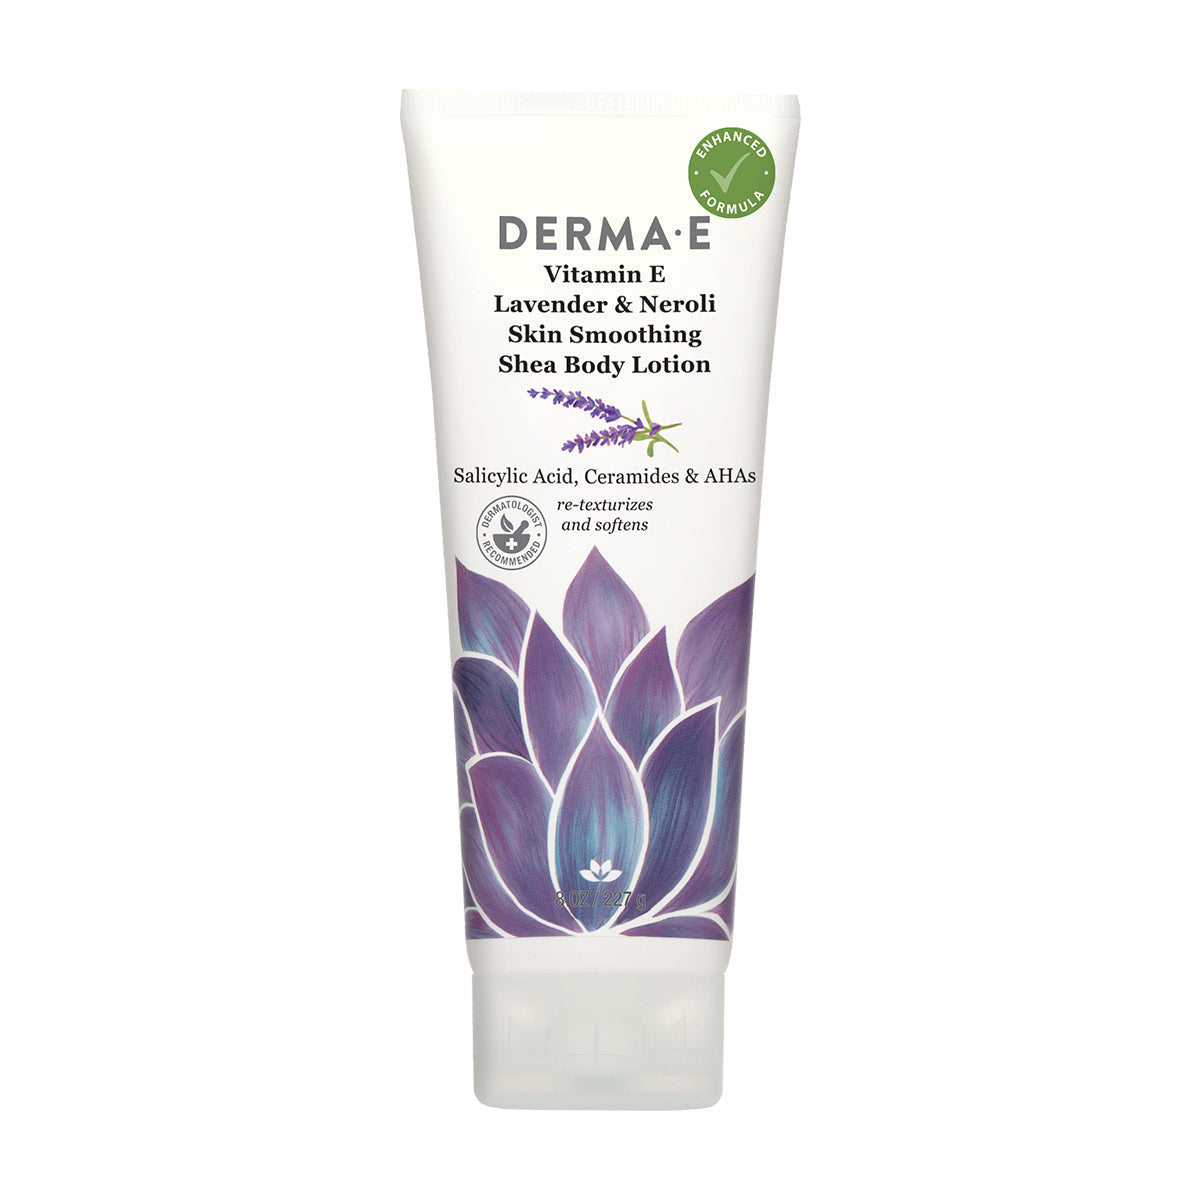 Vitamin E Lavender & Neroli Skin Smoothing Shea Body Lotion - by DERMA E |ProCare Outlet|